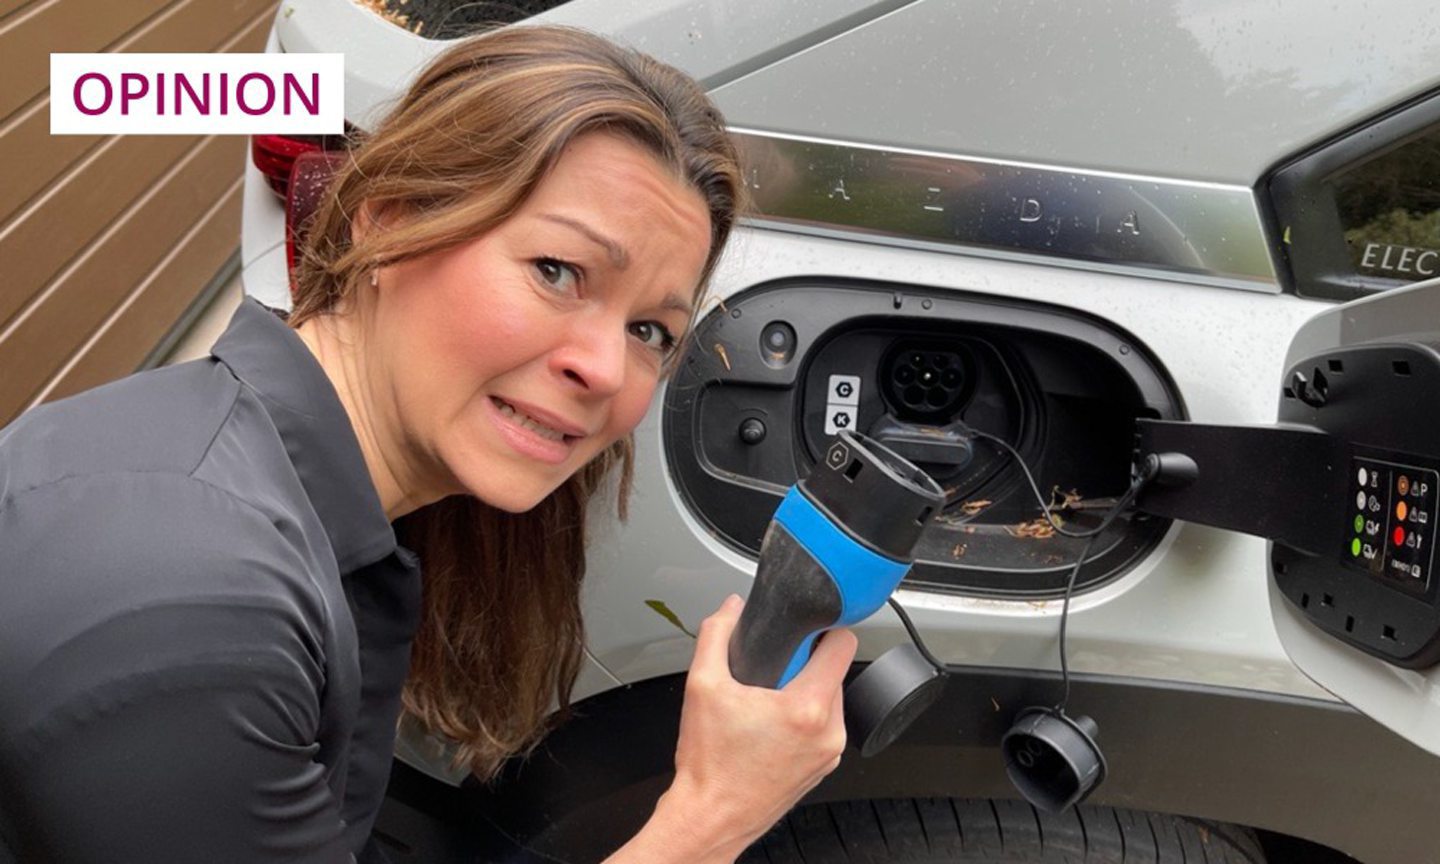 Electric cars are great, says Clare, except for one tiny detail.